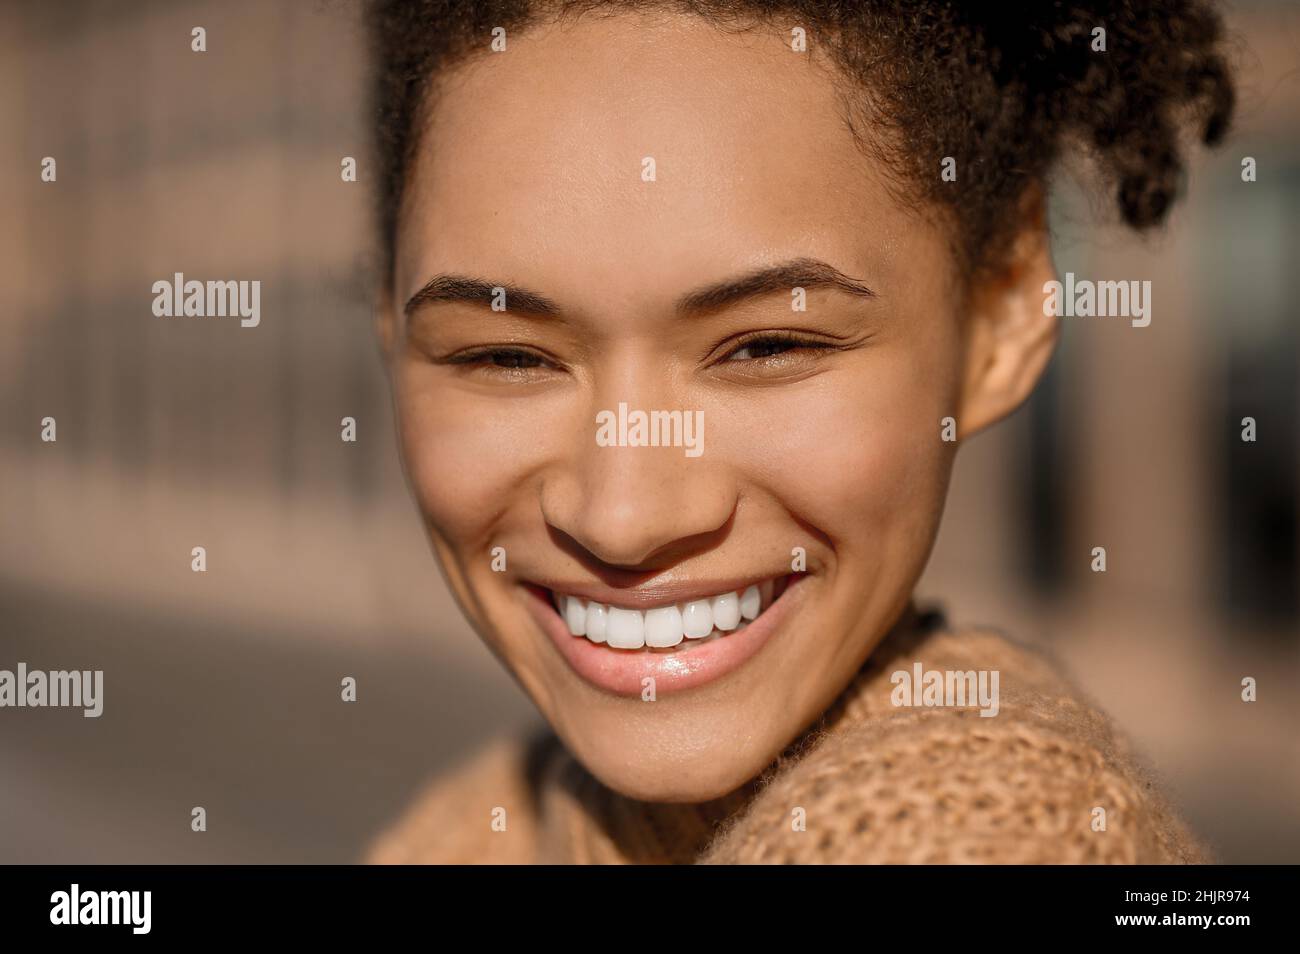 Close up face of happy girl with toothy smile Stock Photo